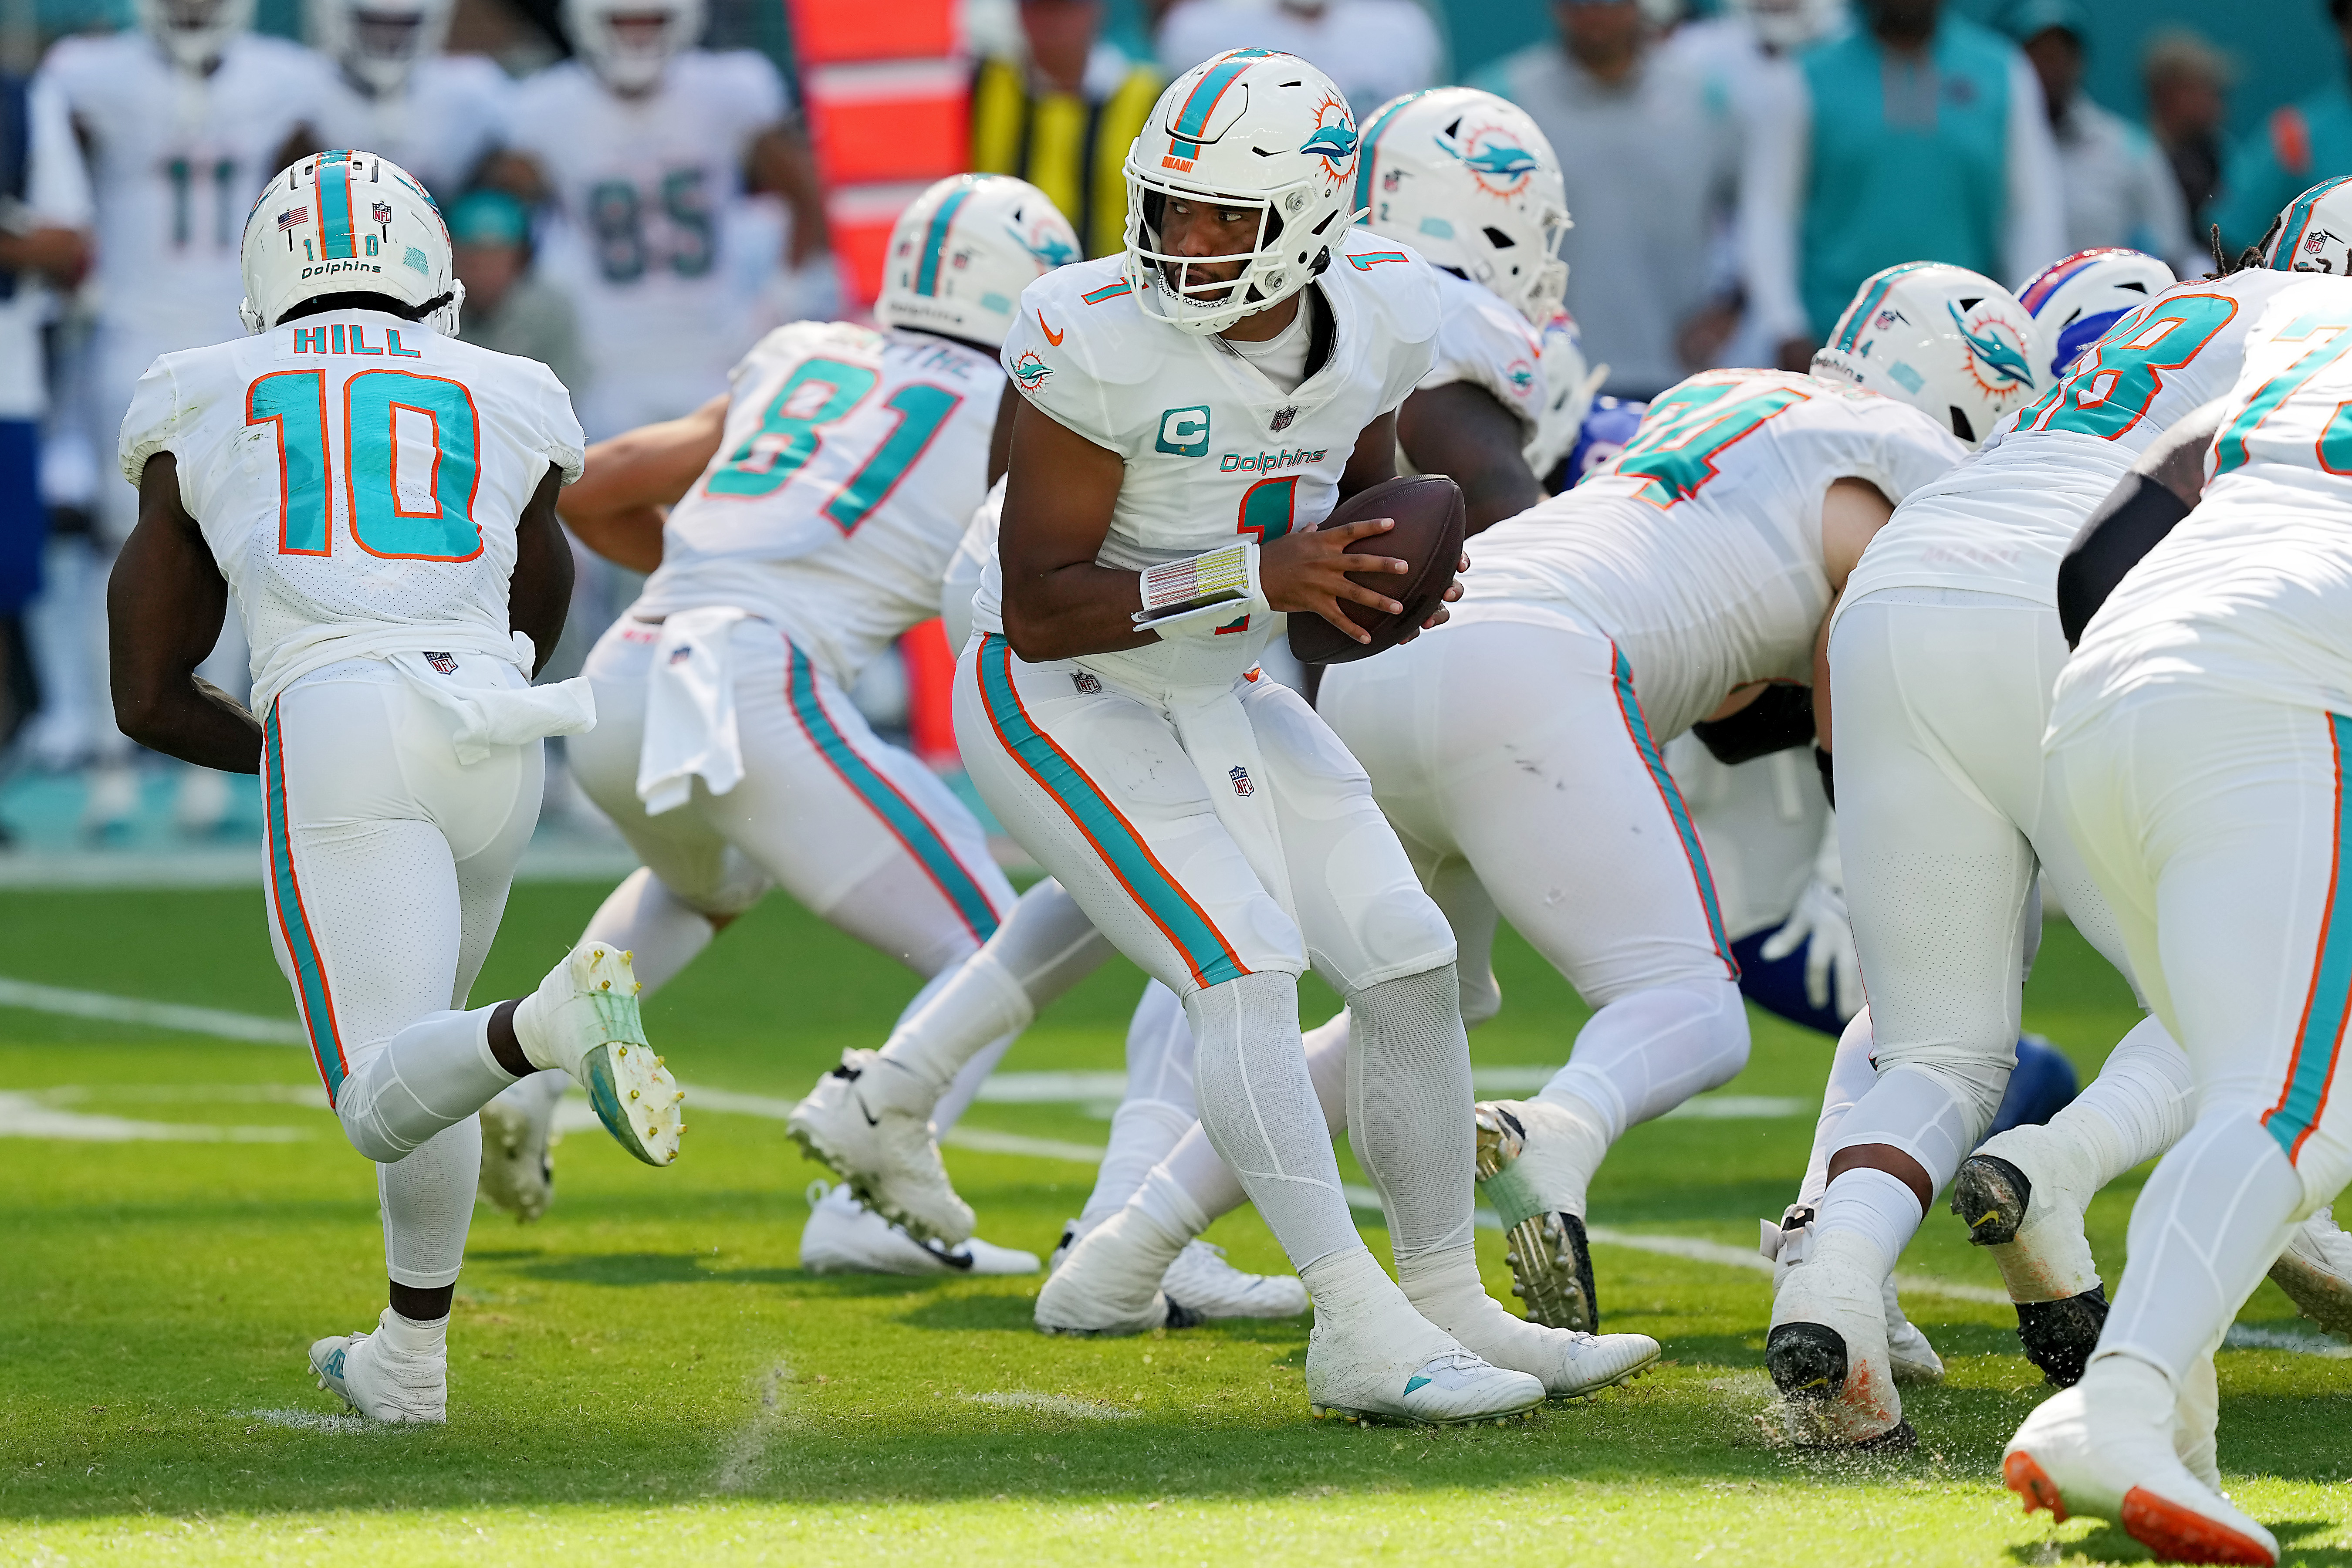 Tua Tagovailoa #1 of the Miami Dolphins looks to hand the ball off during the game against the Buffalo Bills at Hard Rock Stadium on September 25, 2022 in Miami Gardens, Florida.